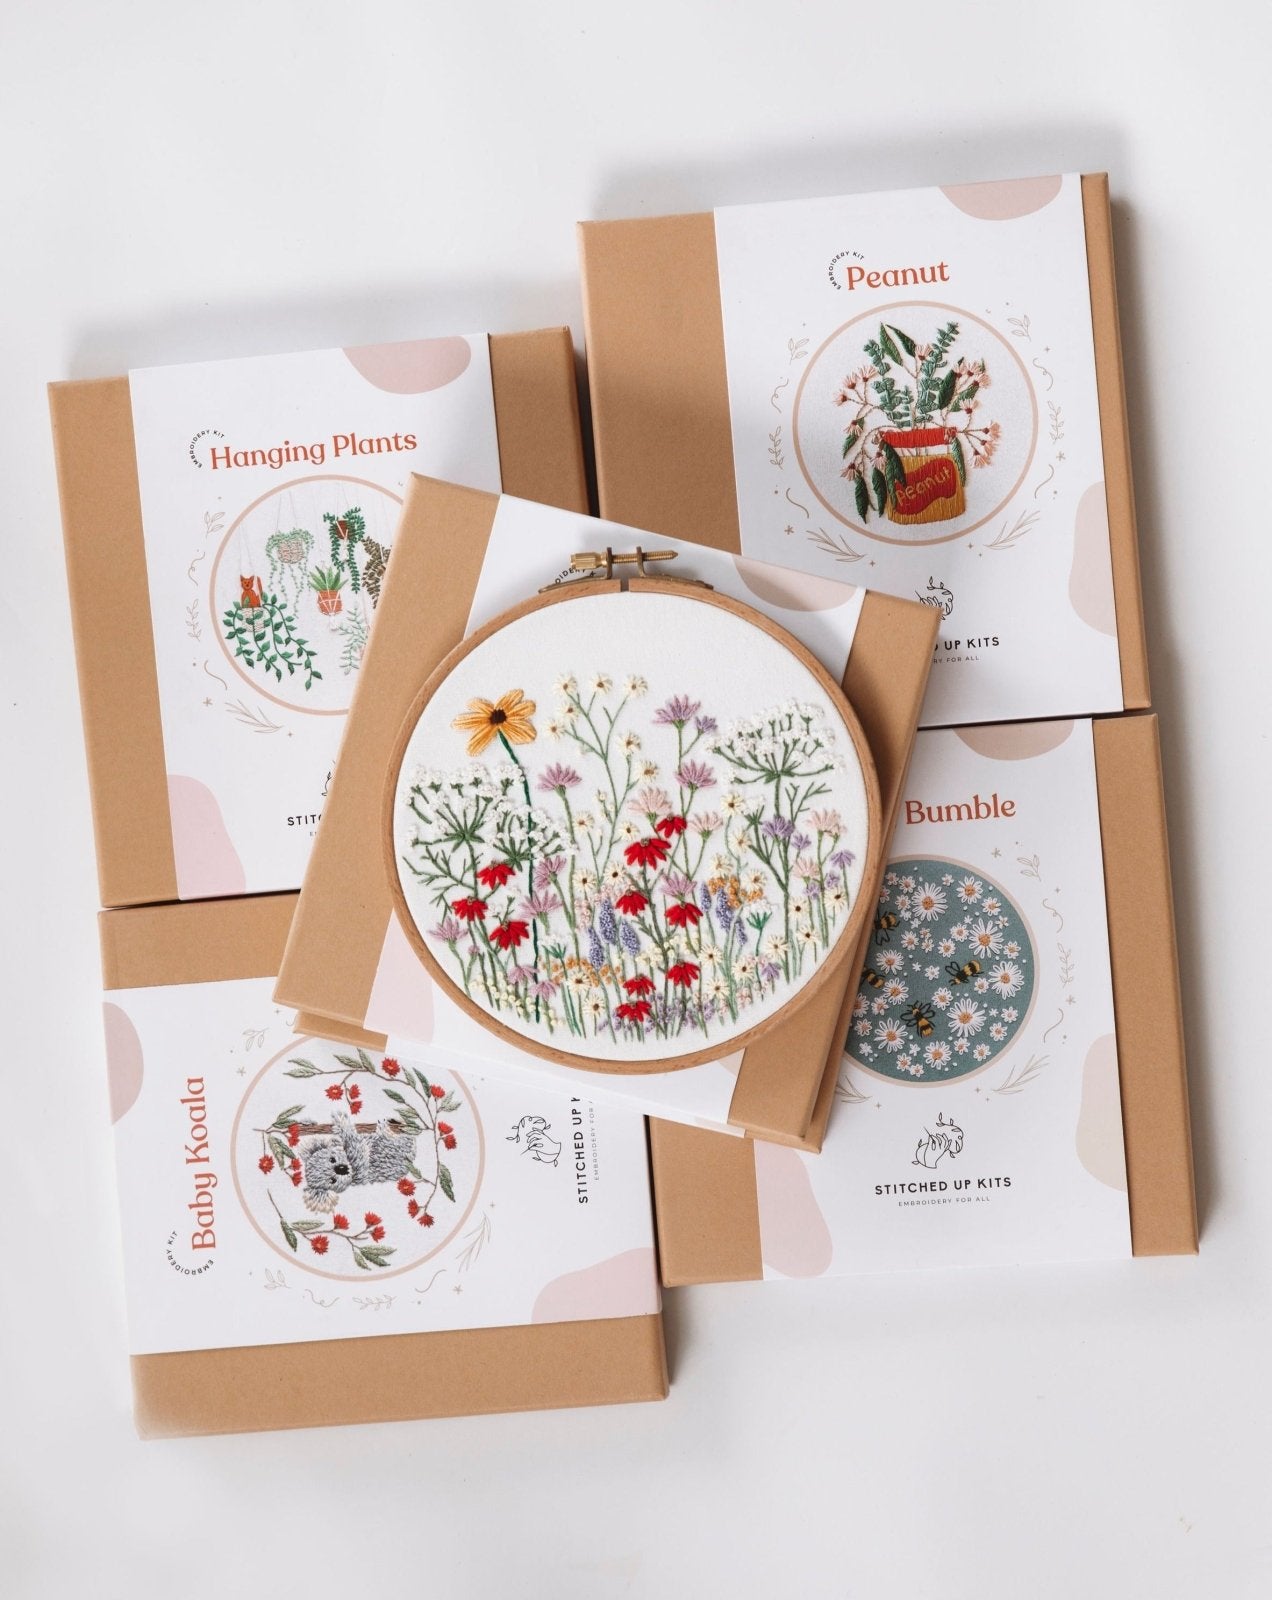 Hanging Pot Plants Embroidery Kit - Stitched Up Kits